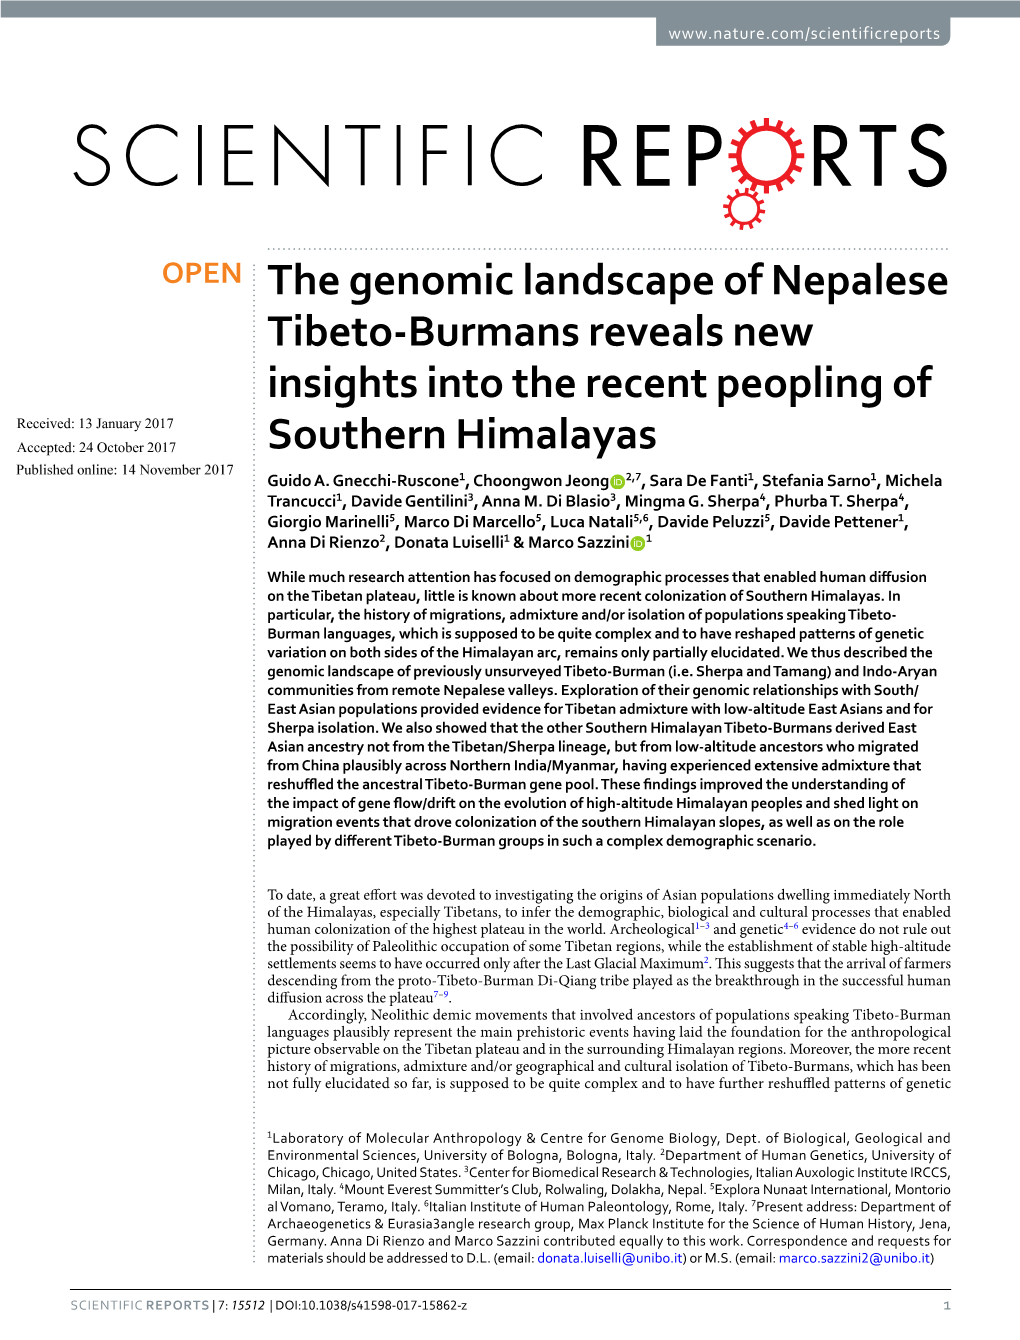 The Genomic Landscape of Nepalese Tibeto-Burmans Reveals New Insights Into the Recent Peopling of Southern Himalayas